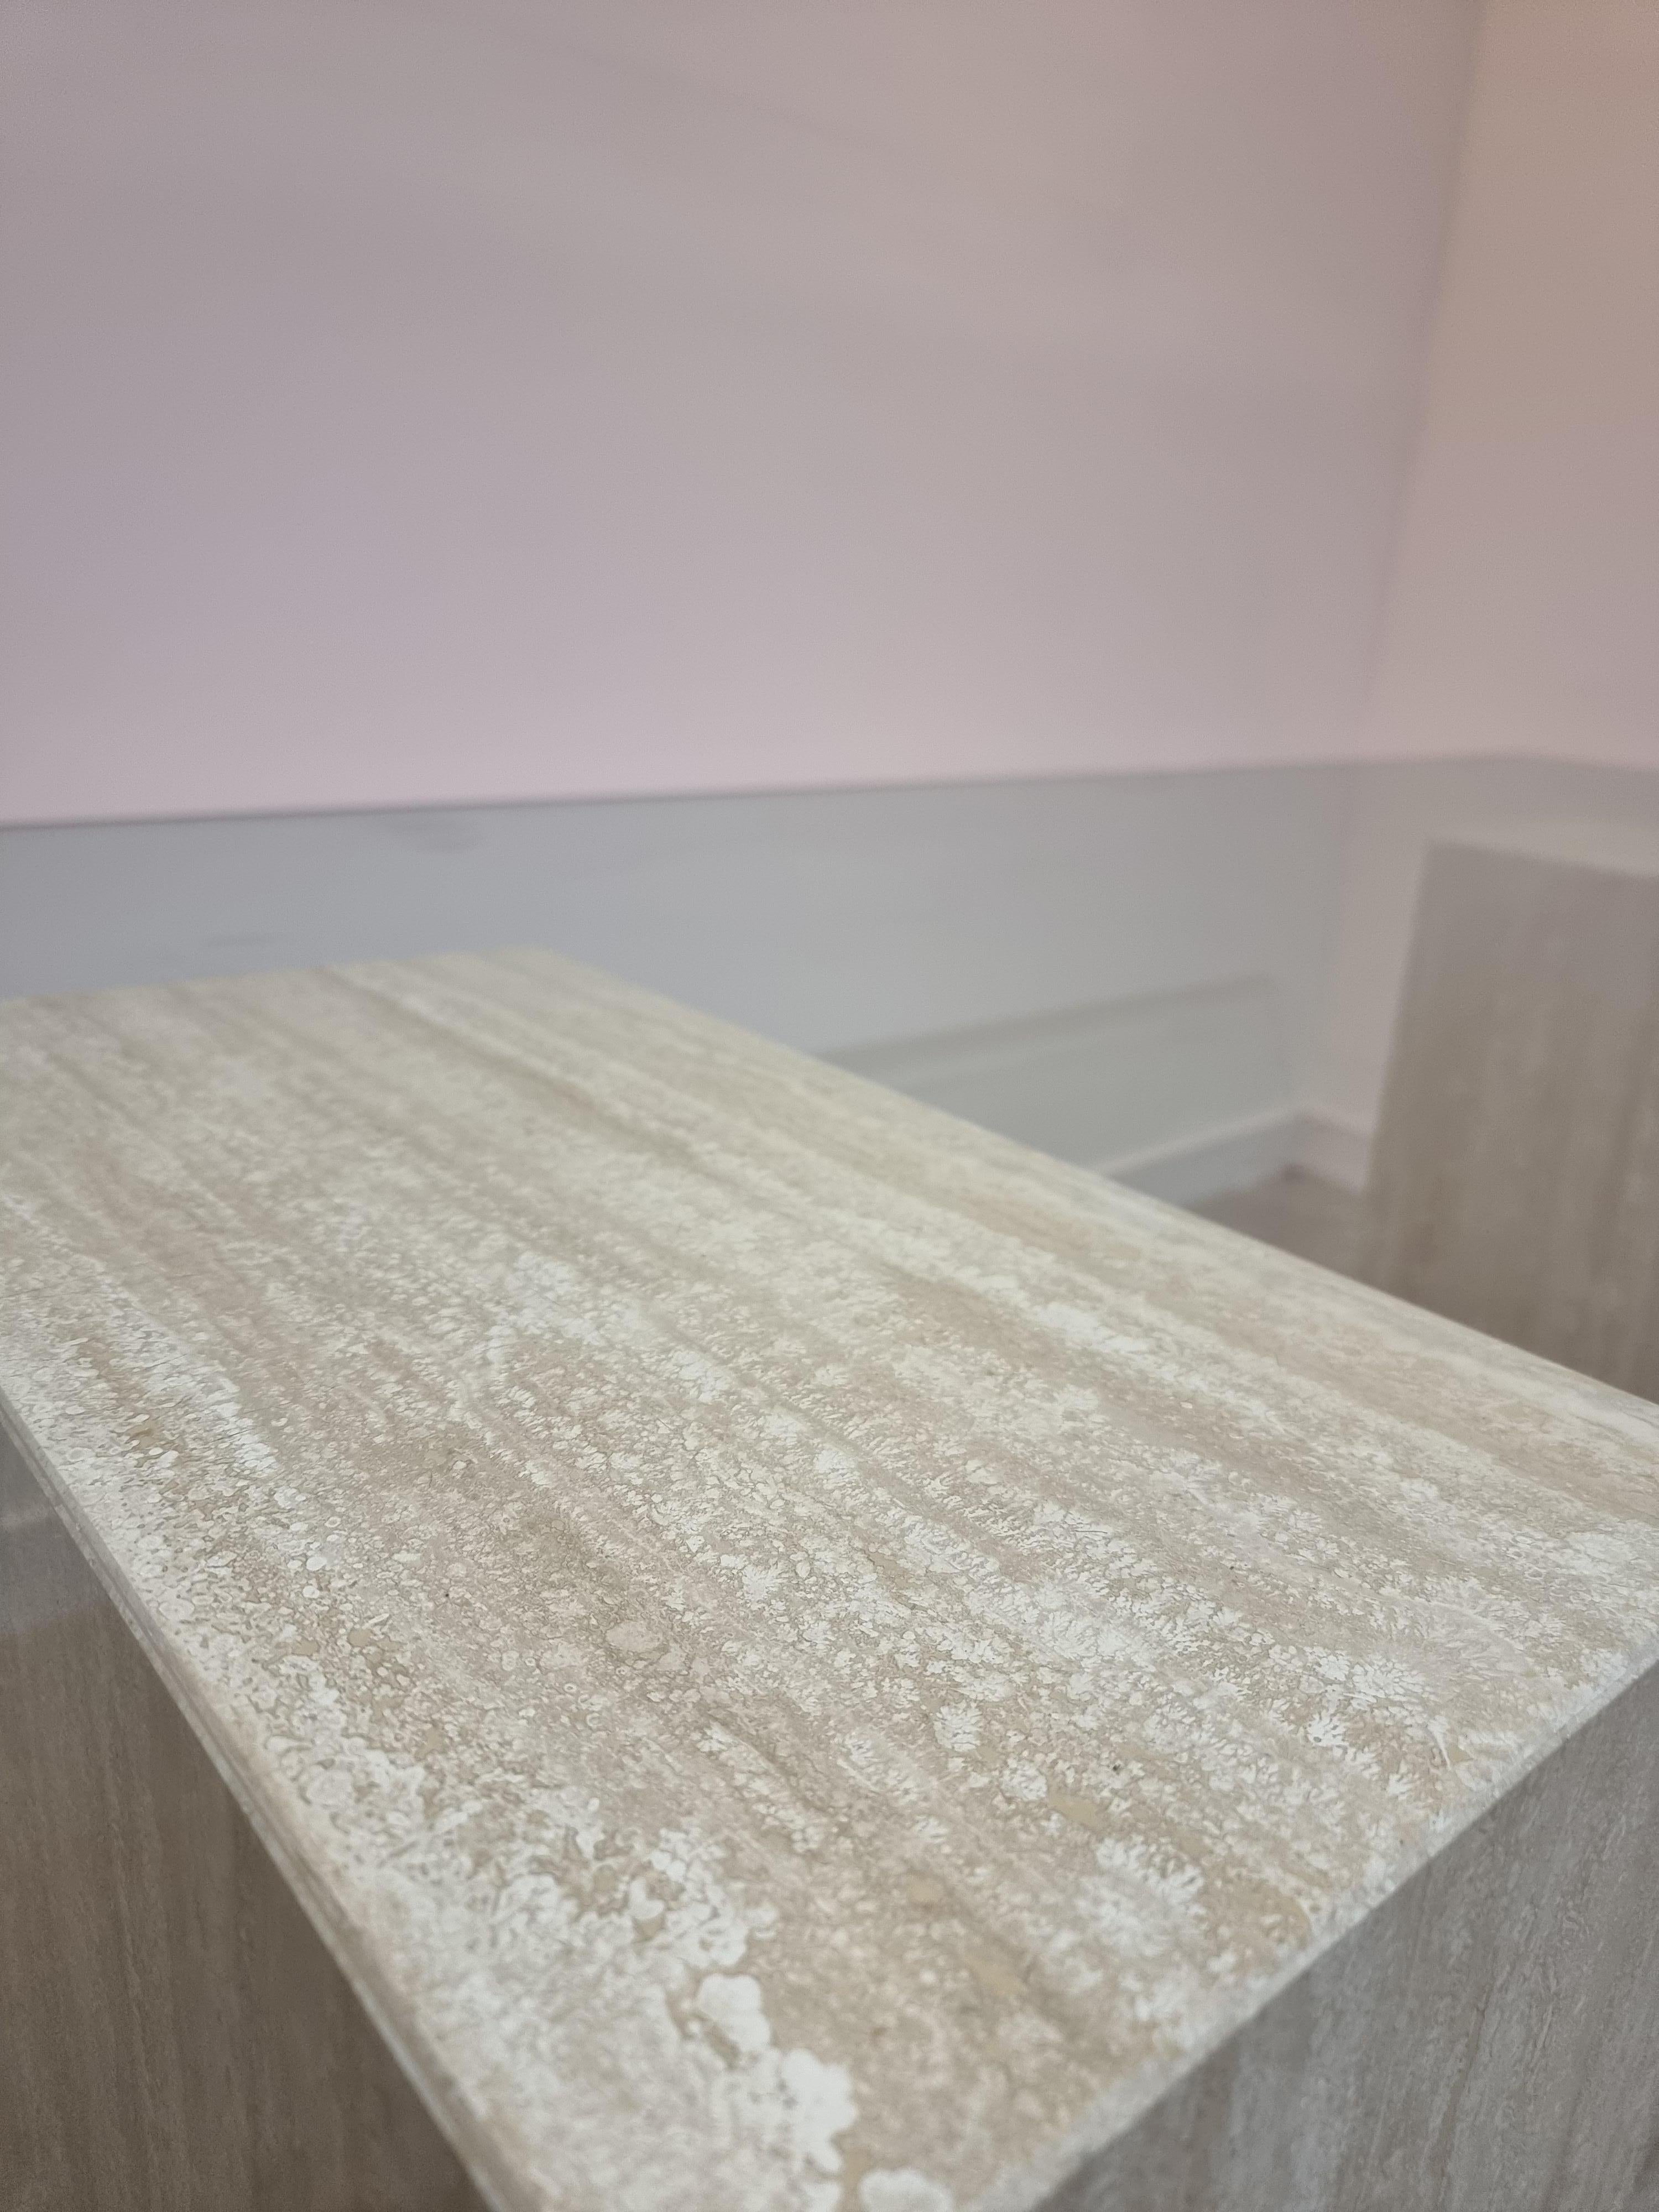 Impressive Italian Travertine Diningtable with Glass Top 1970s For Sale 7